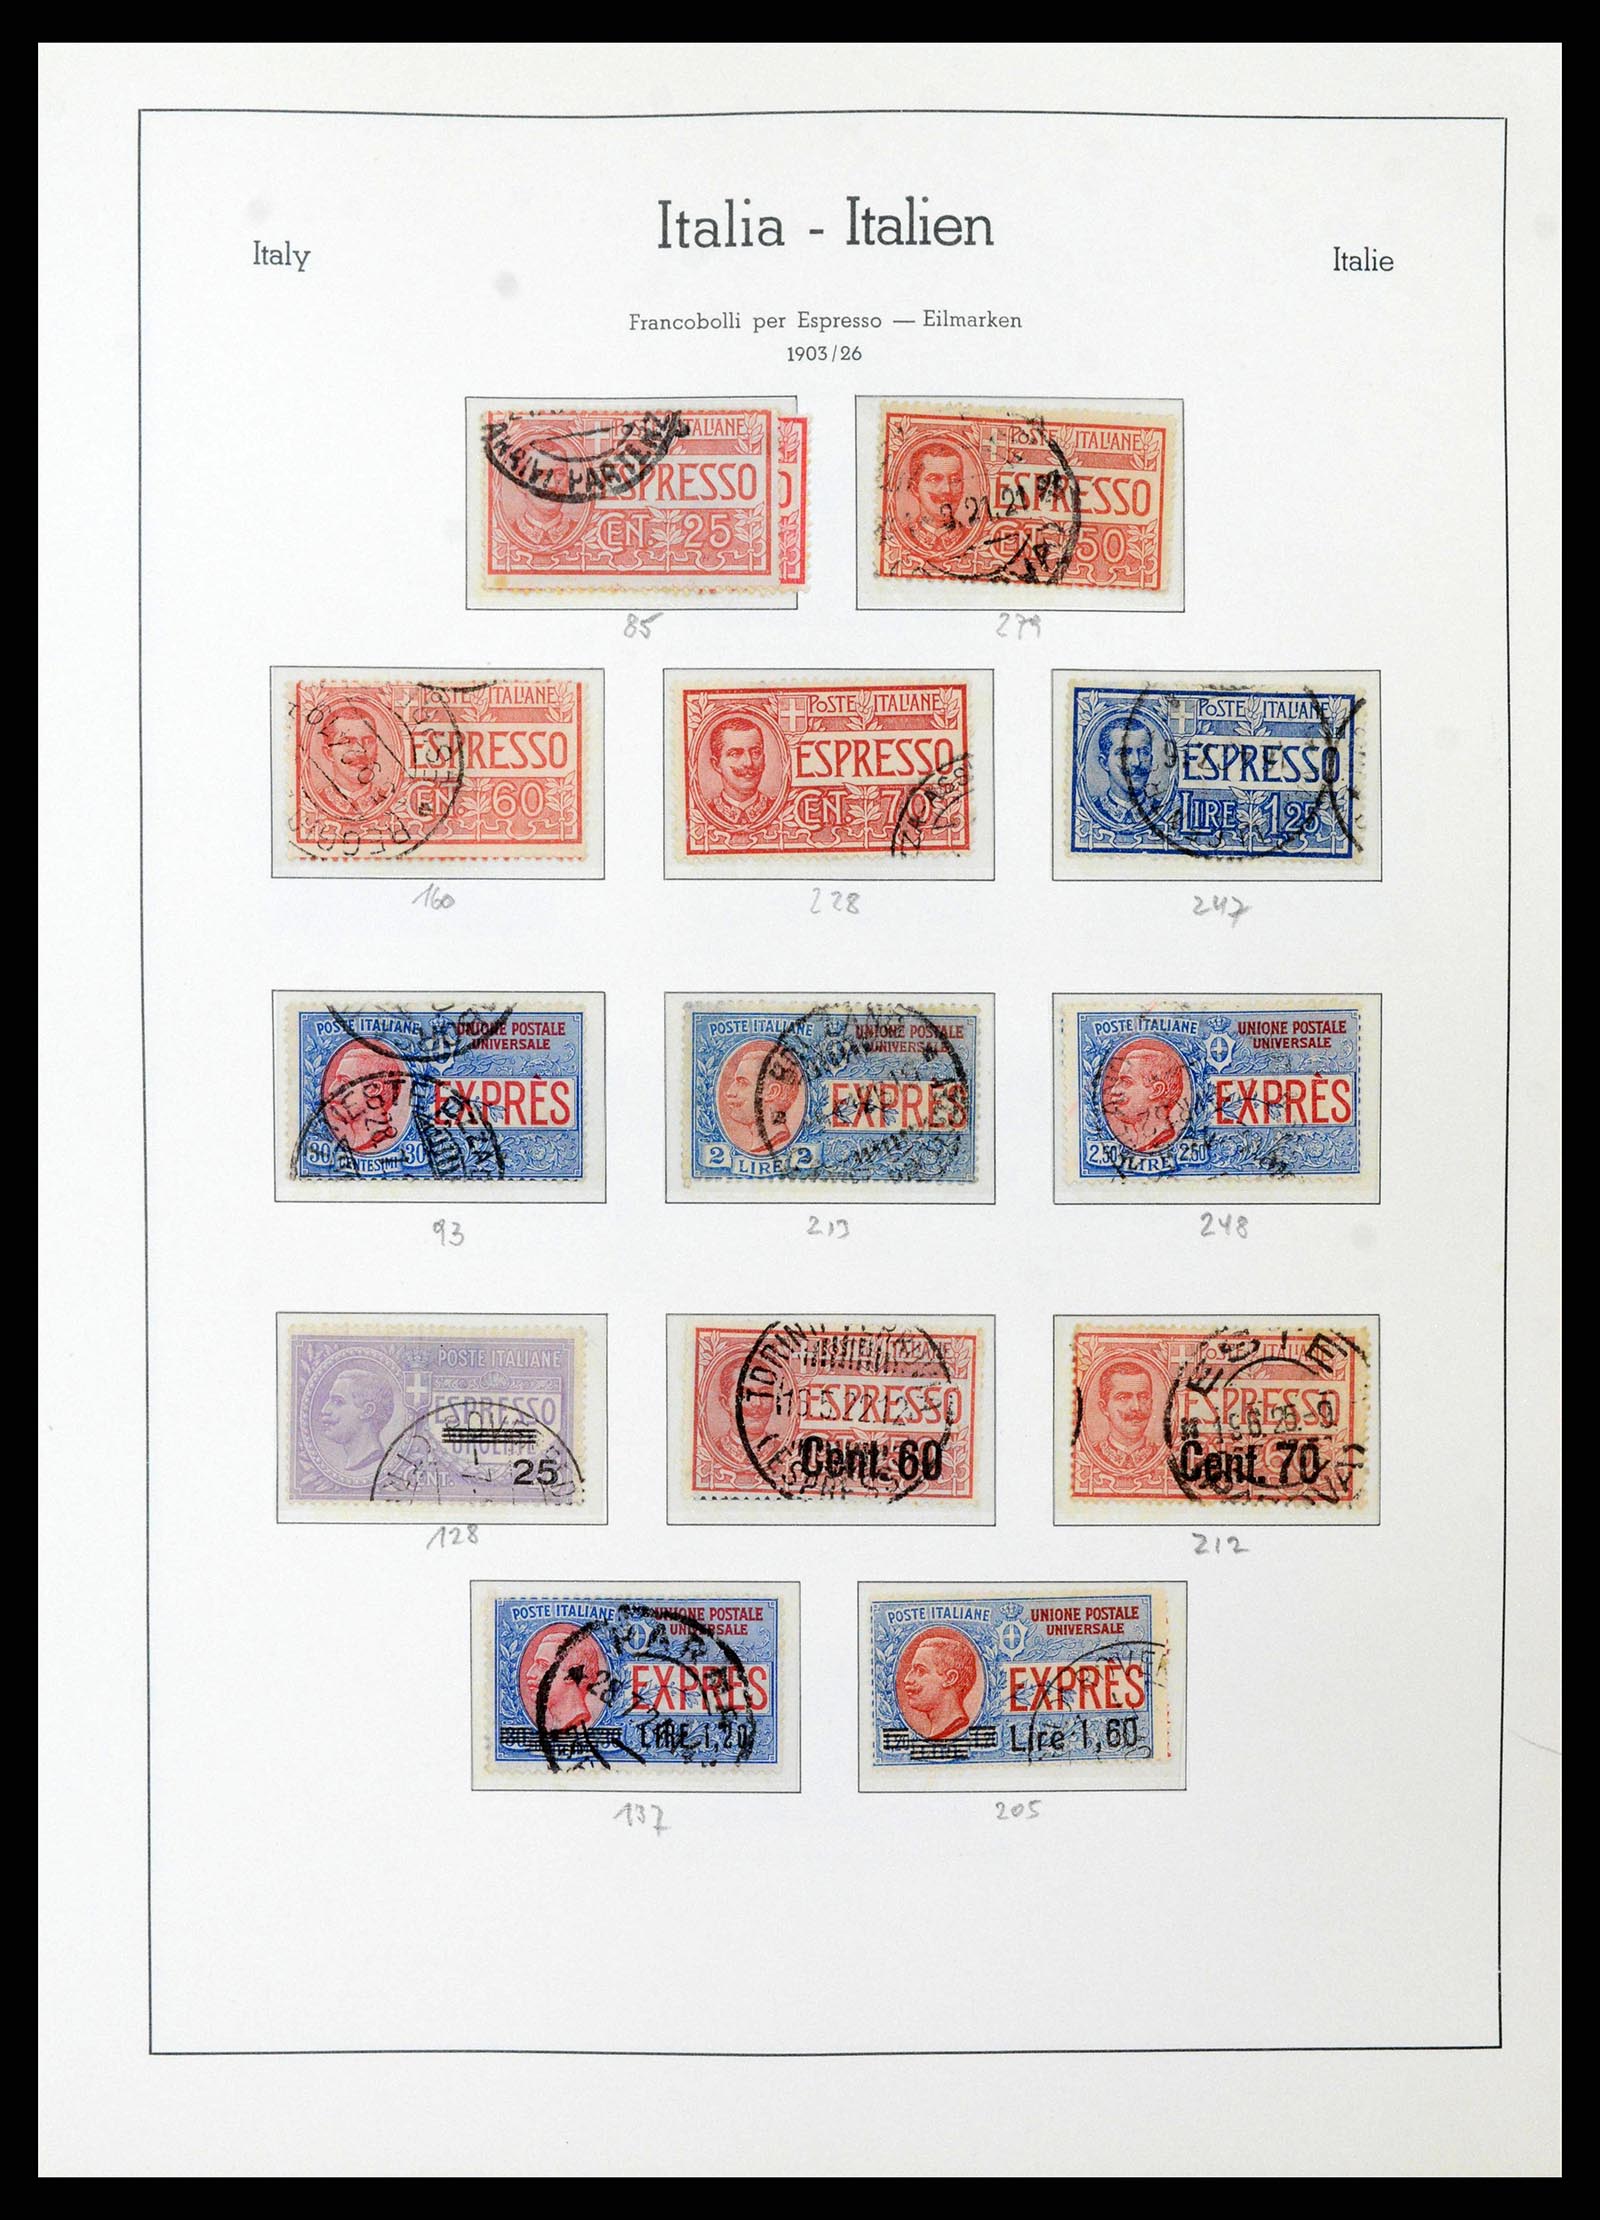 38493 0017 - Stamp collection 38493 Italy 1861-1970.